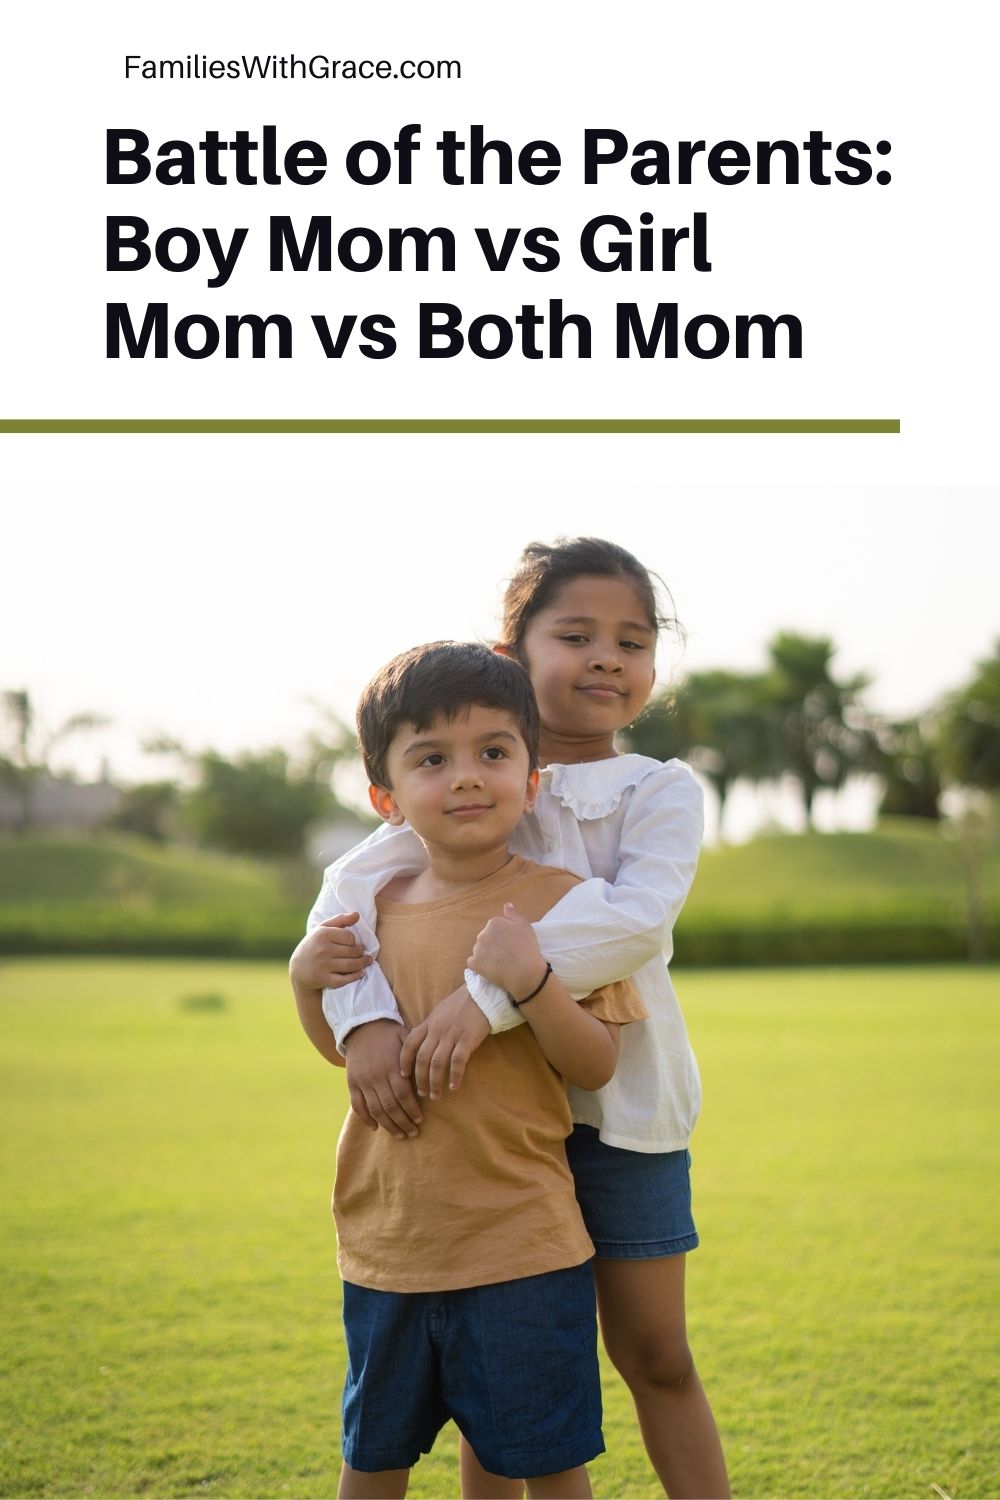 Boy mom vs girl mom: How they\'re different and the same